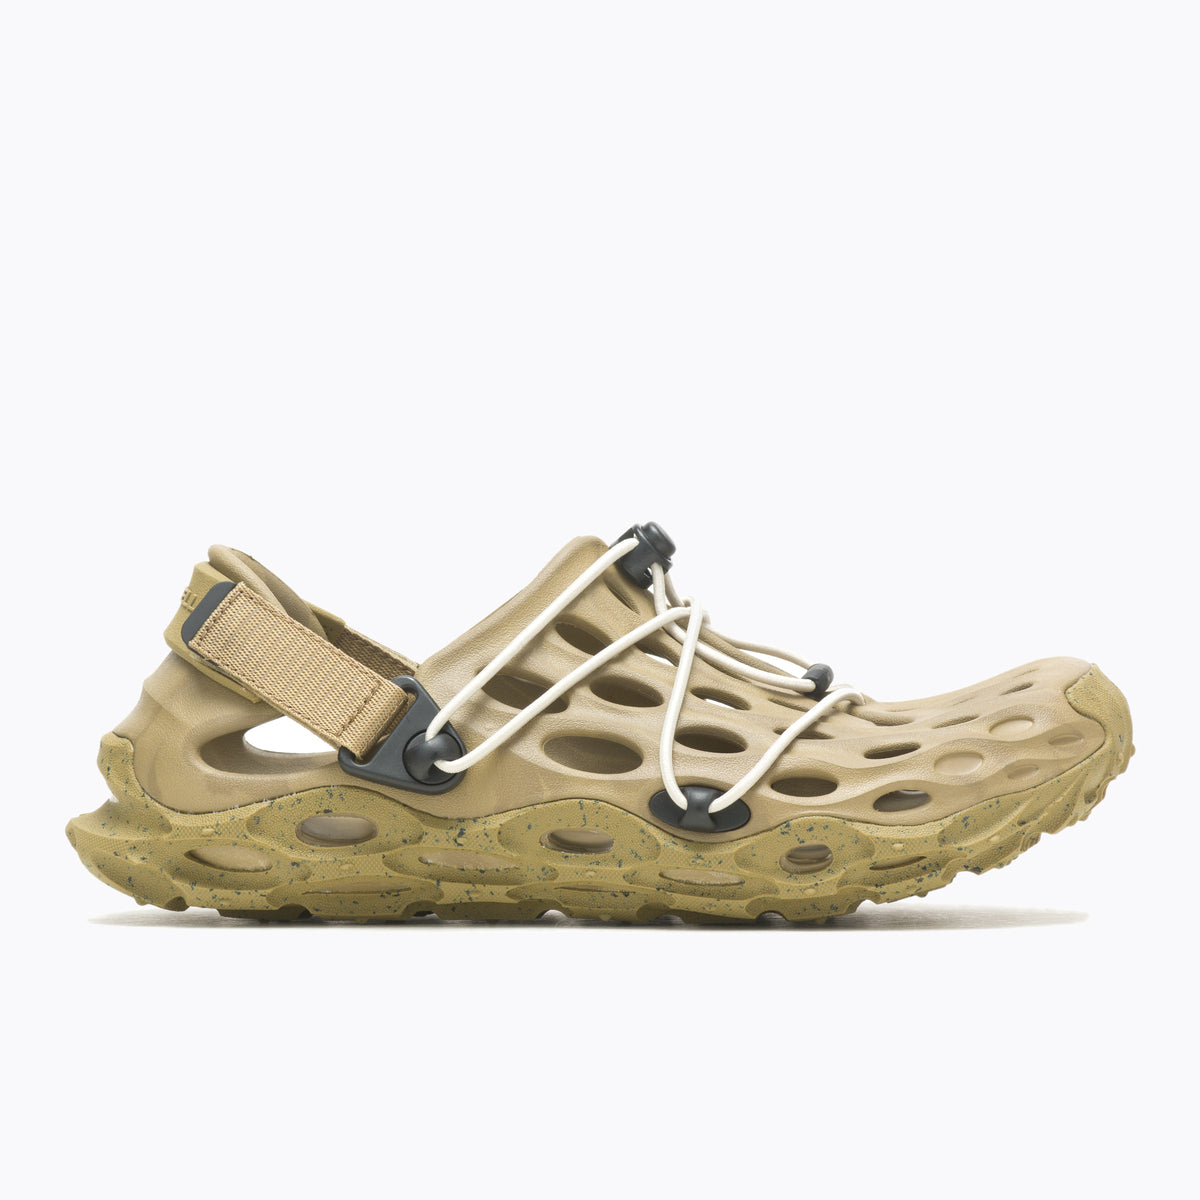 Hydro Moc at Cage 1TRL Women's Water Shoes | Merrell NZ